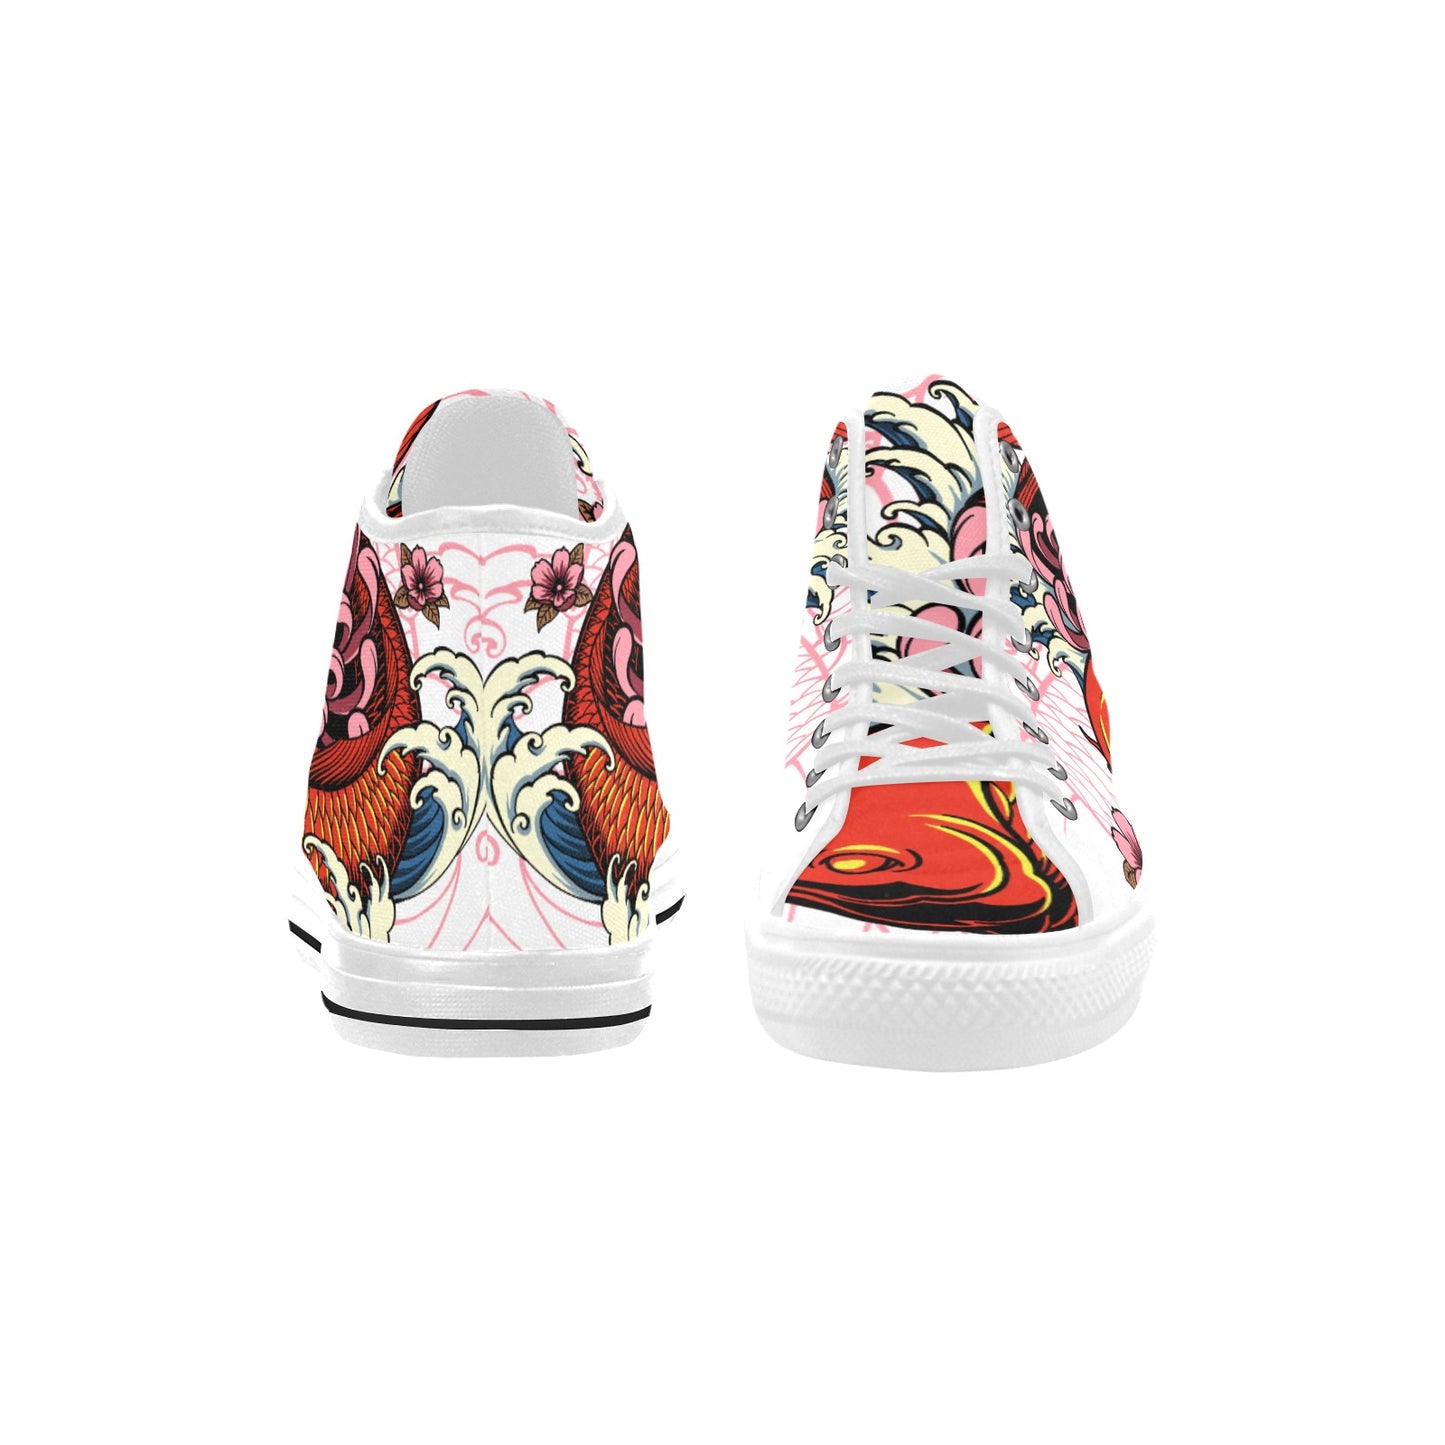 Japanese Koi High Top Canvas Shoes